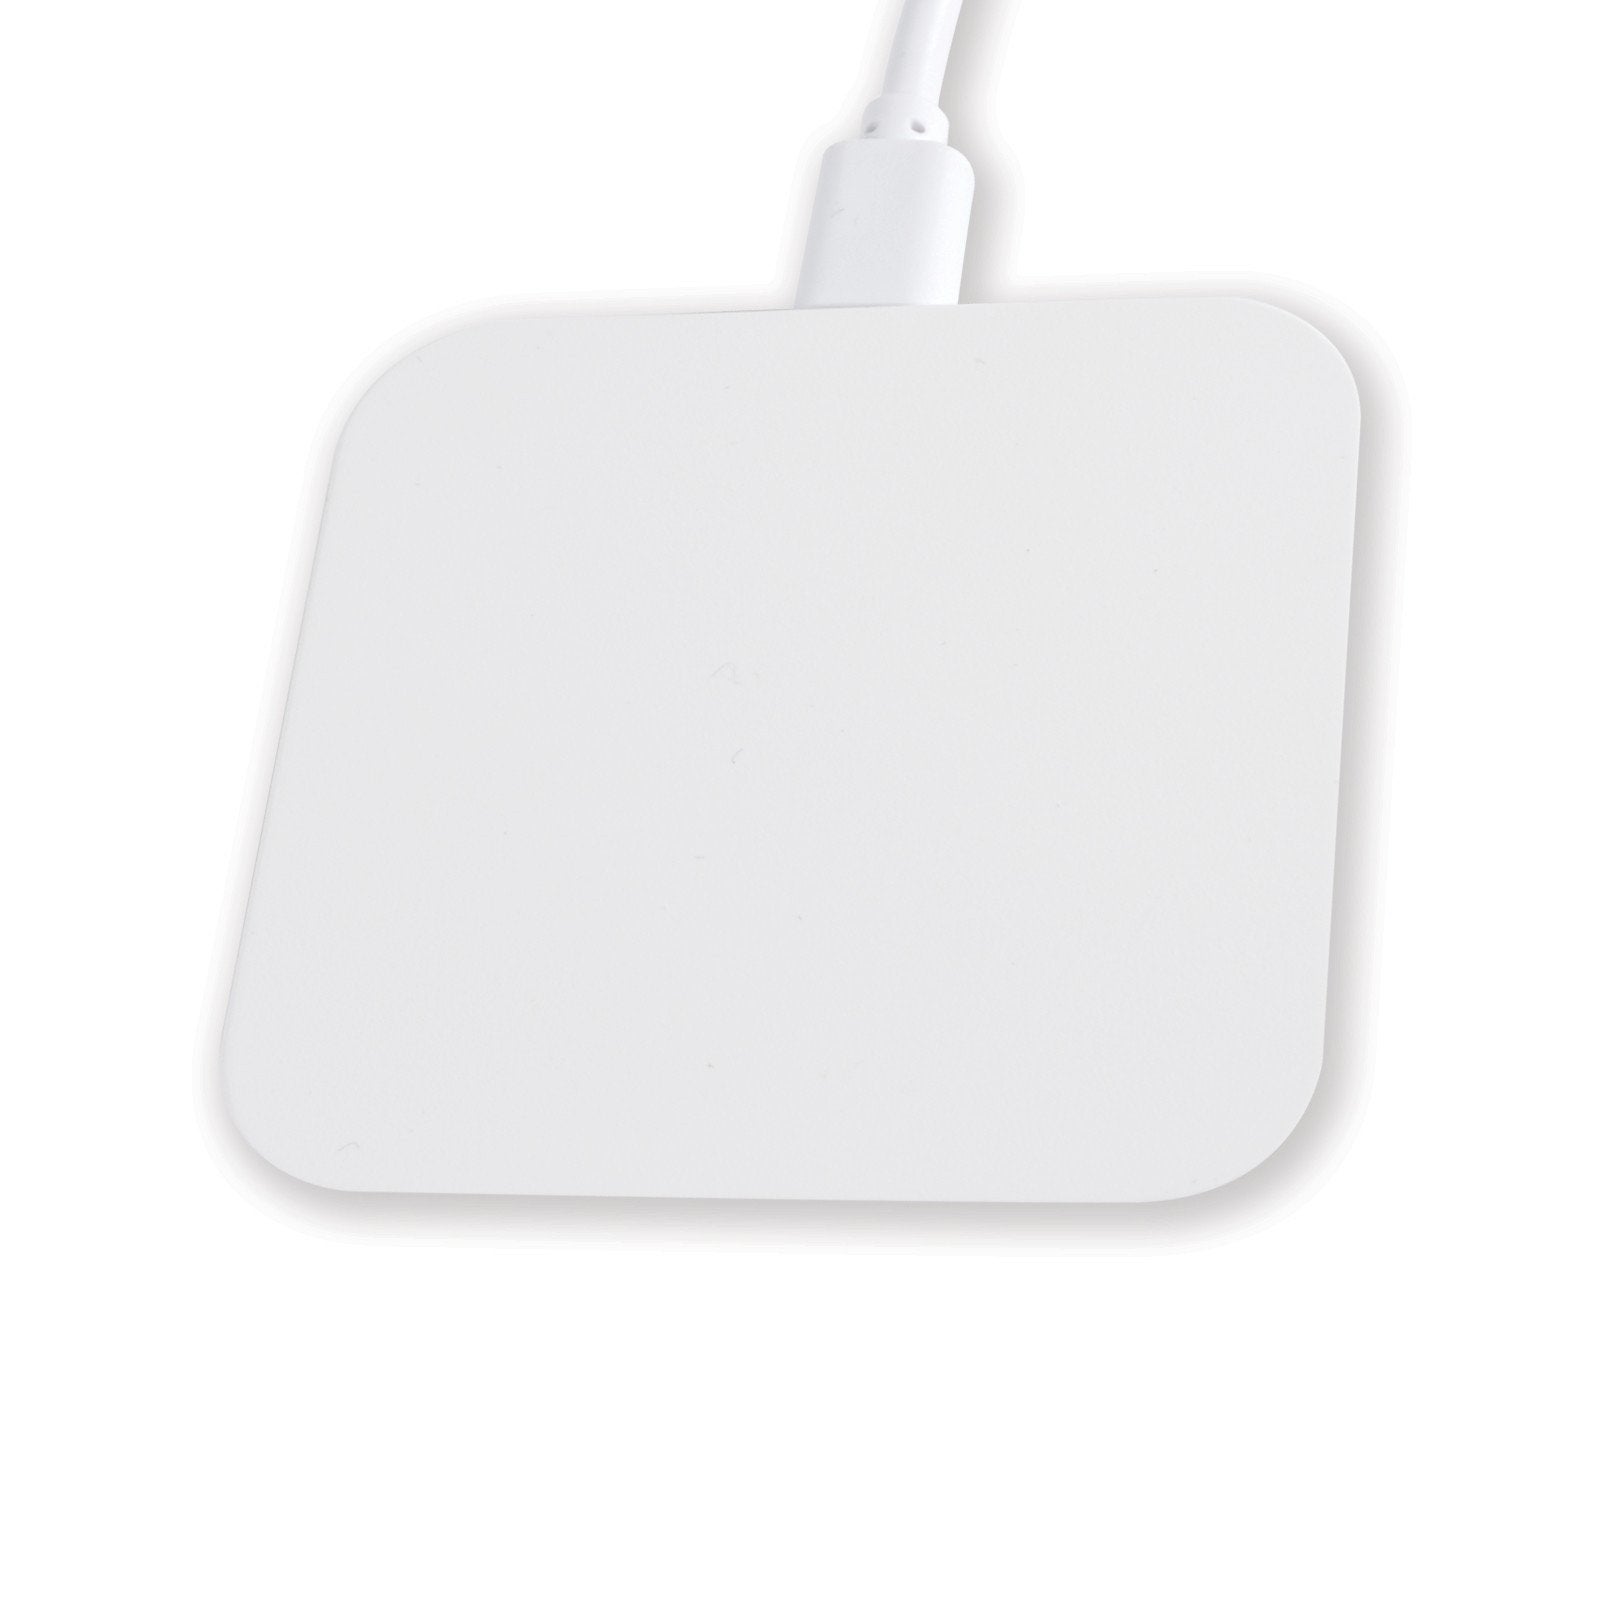 Arc Inductive Wireless Charger